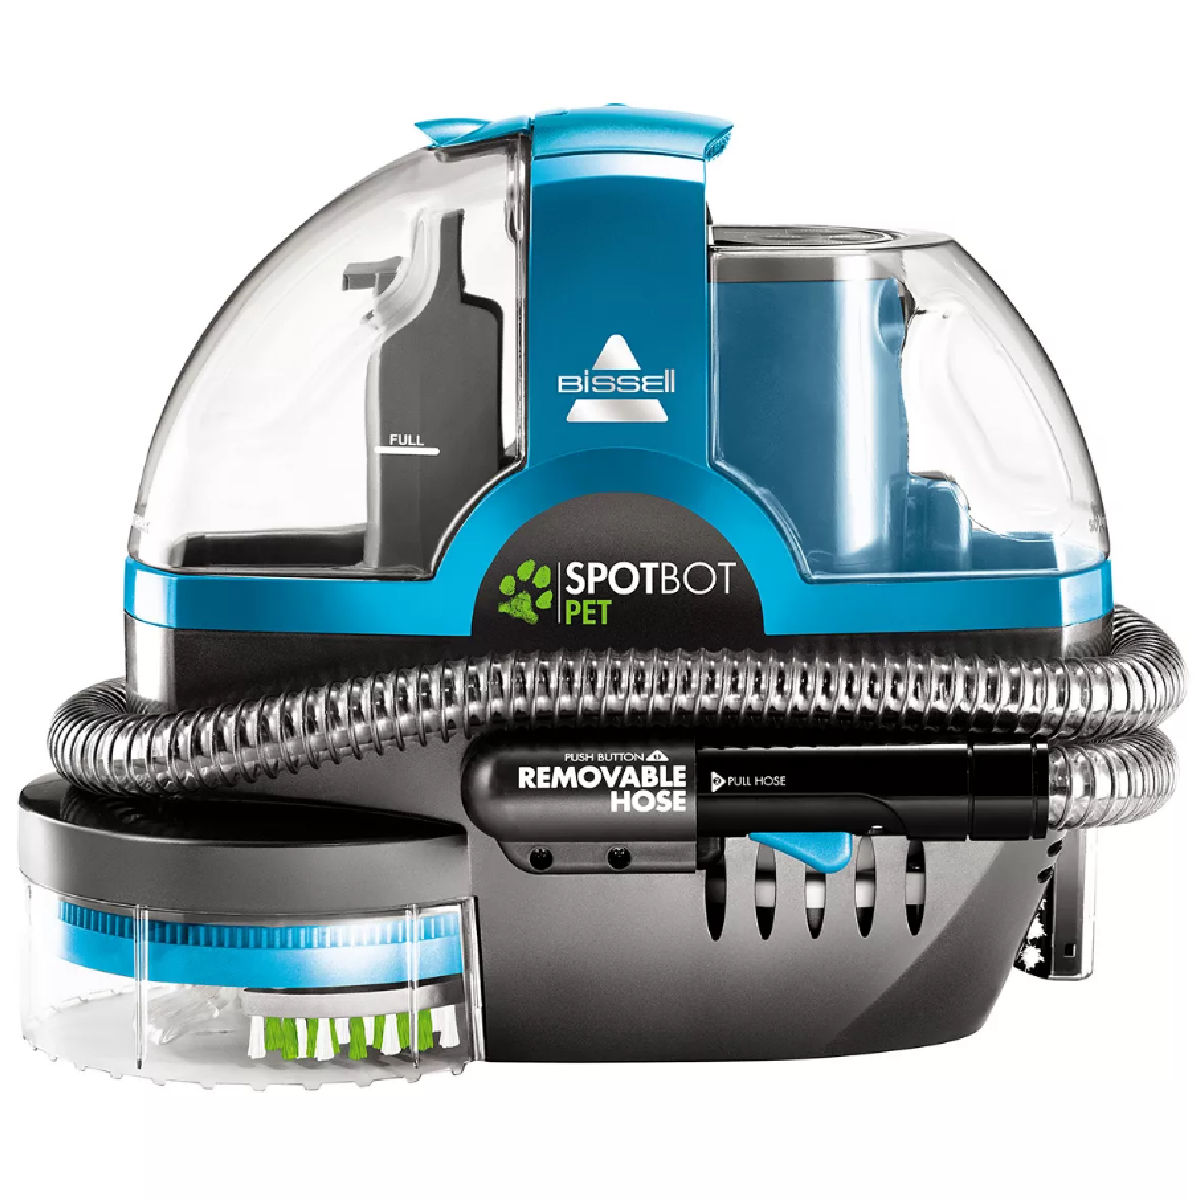 BISSELL SpotBot Pet Deluxe Carpet Cleaner